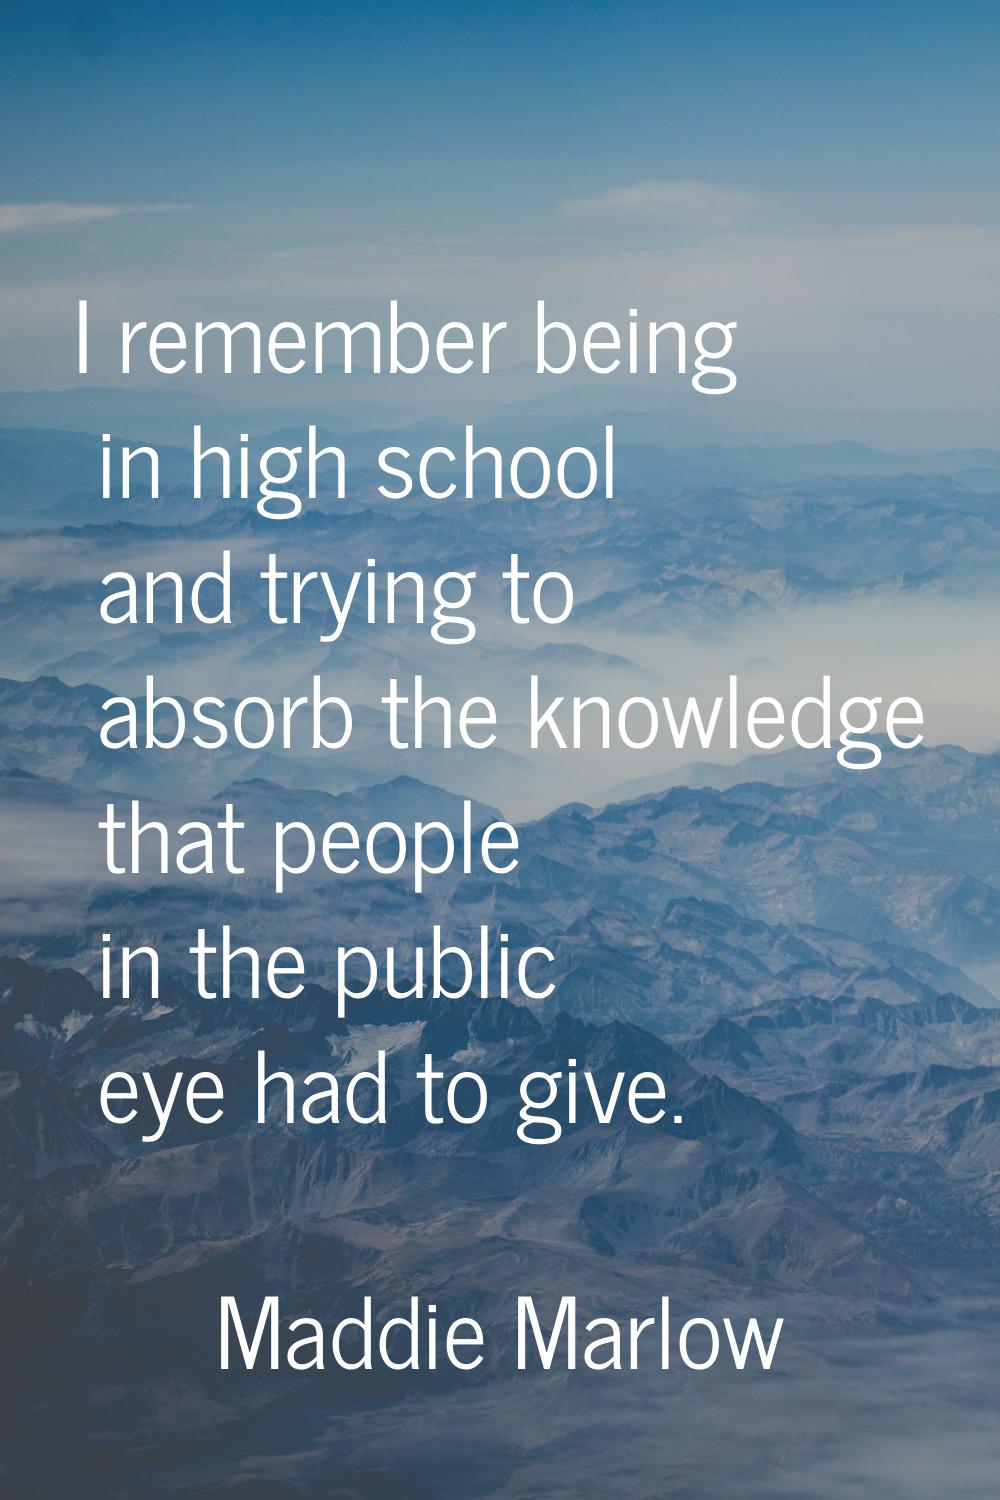 I remember being in high school and trying to absorb the knowledge that people in the public eye ha